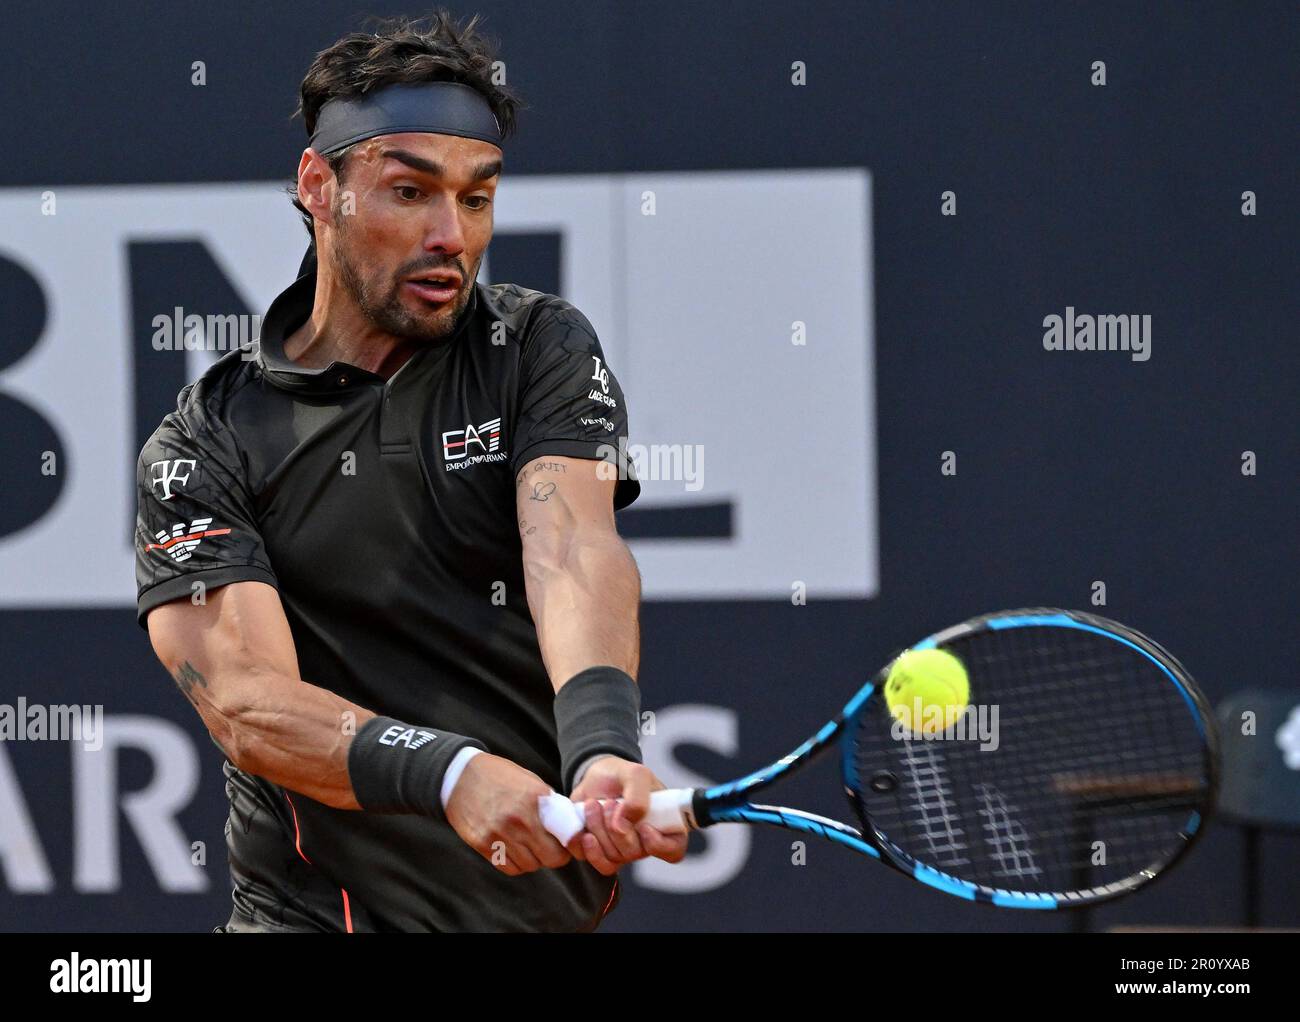 May 10, 2023, ROME Fabio Fognini of Italy in action during his mens singles first round match against Andy Murray of Britain (not pictured) at the Italian Open tennis tournament in Rome,